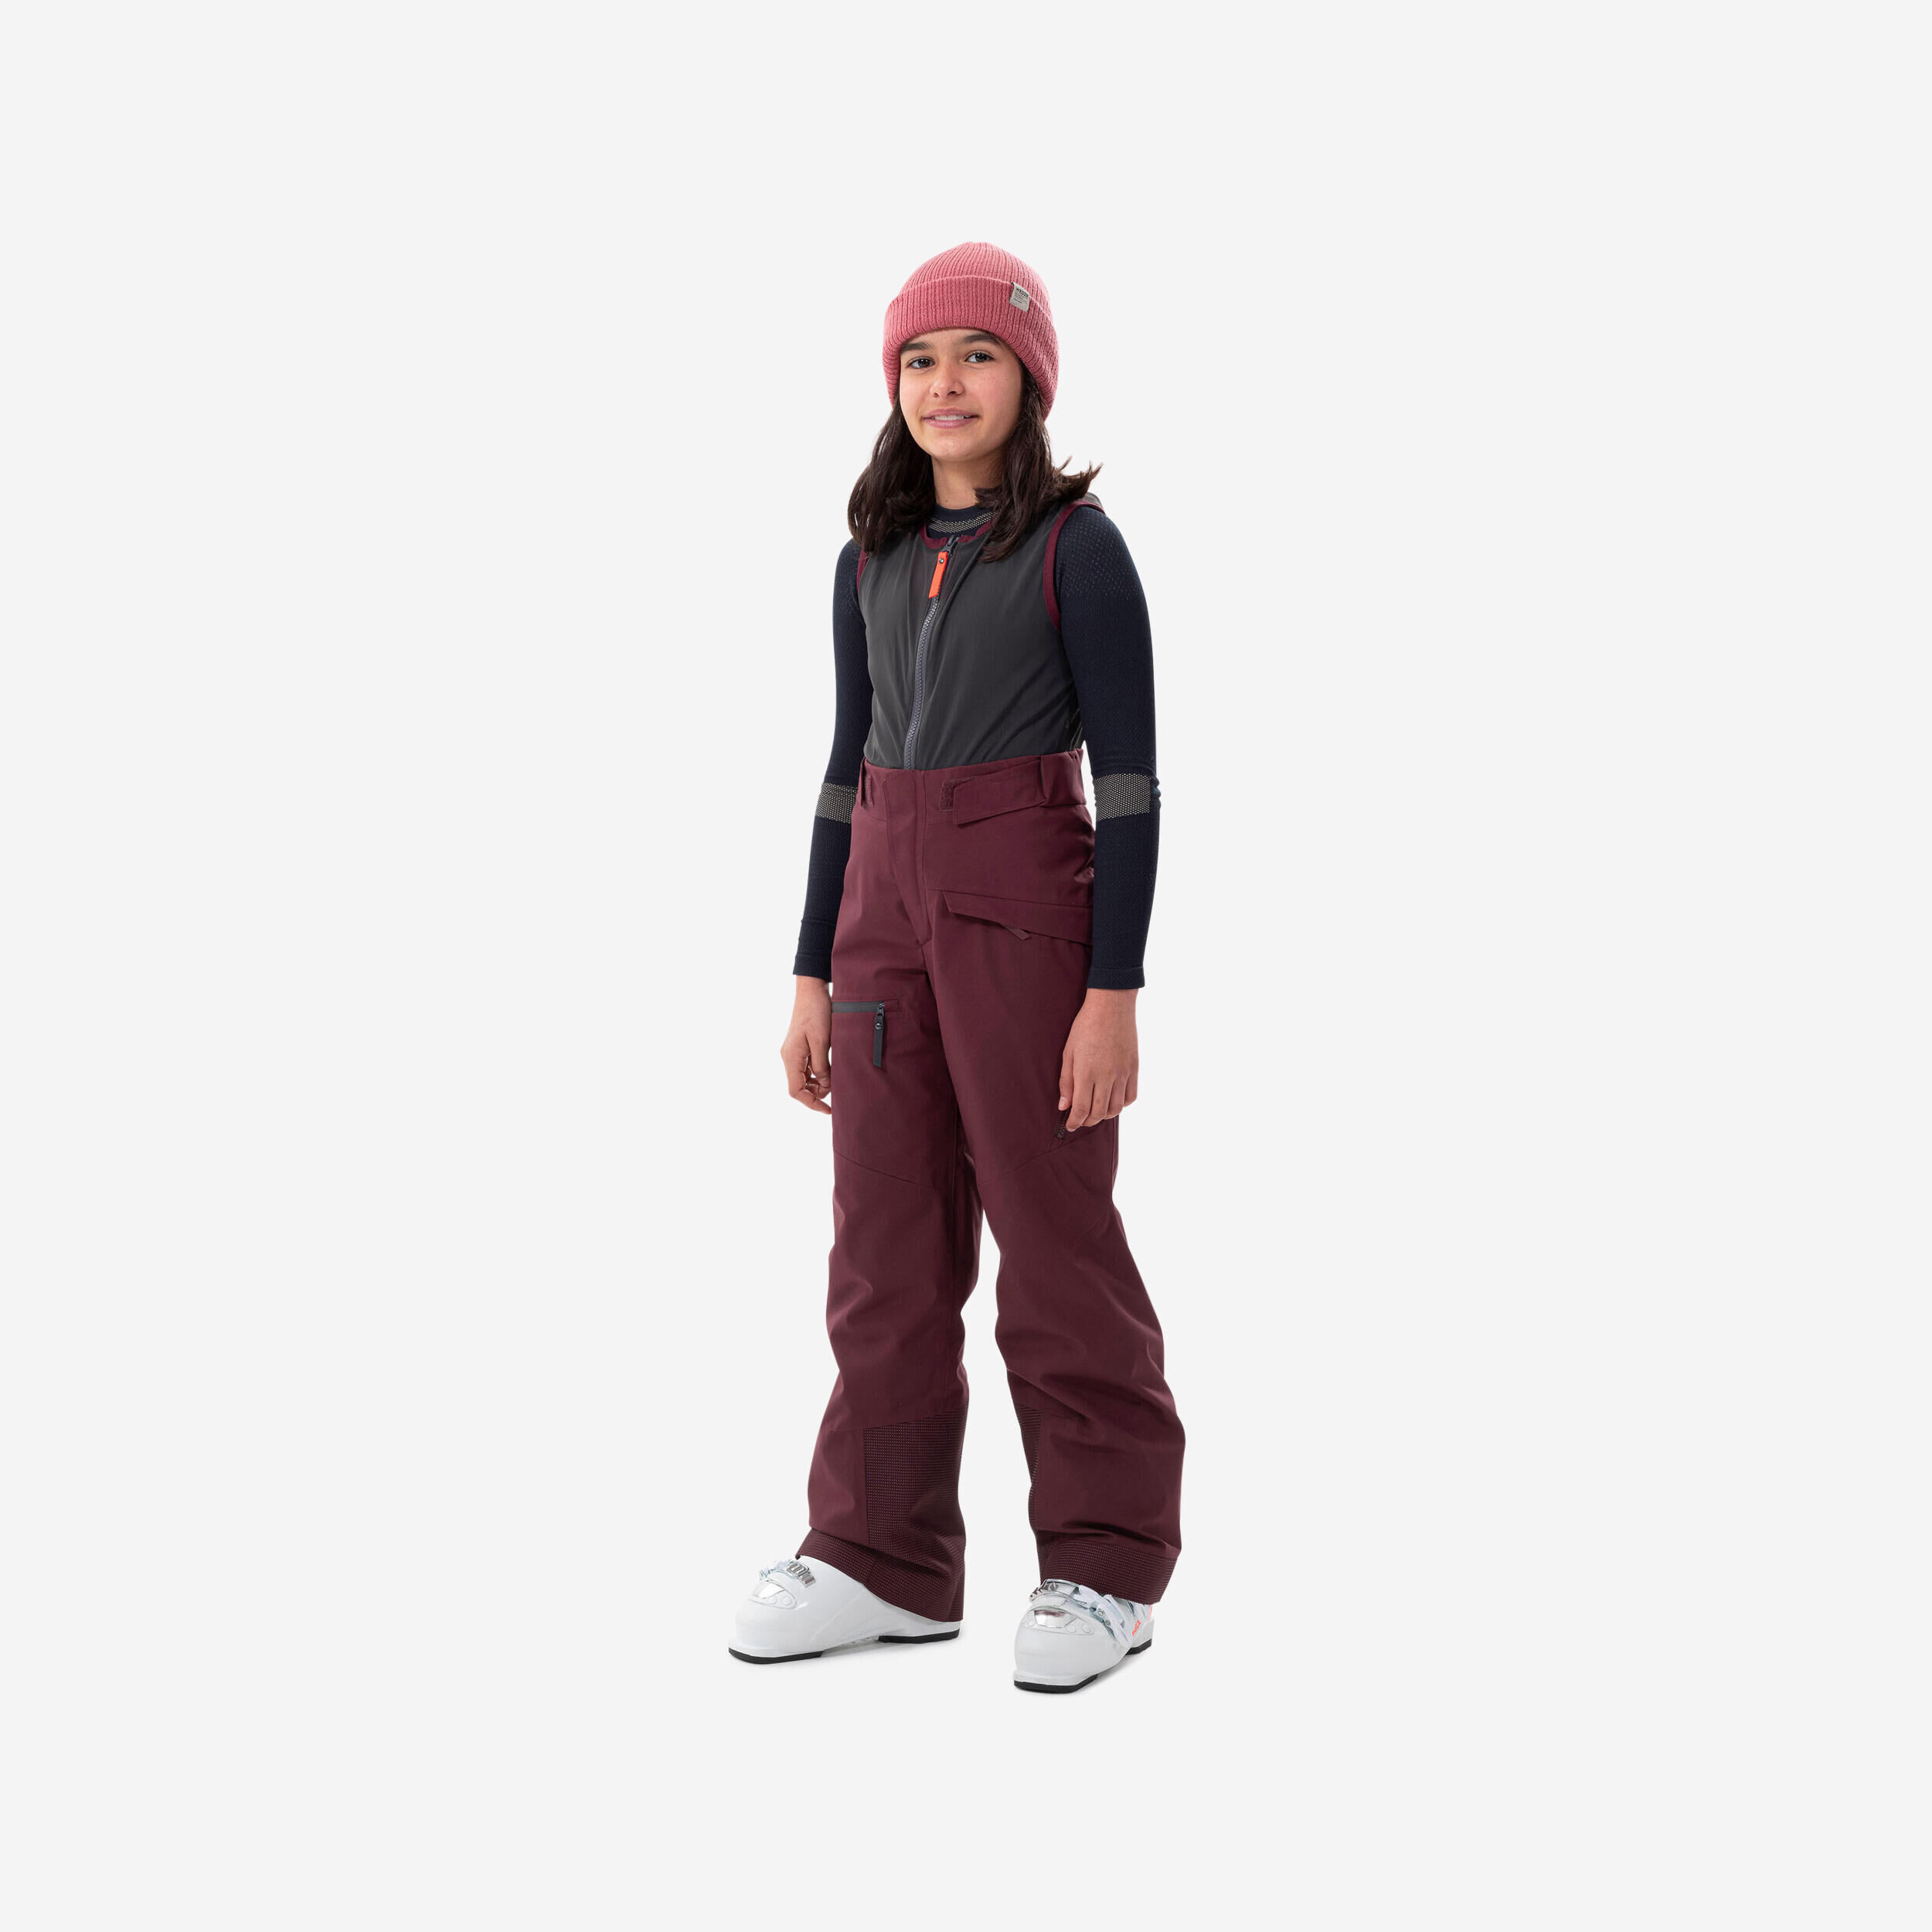 WEDZE KIDS’ SKI TROUSERS WITH BACK PROTECTOR - FR900 - BURGUNDY